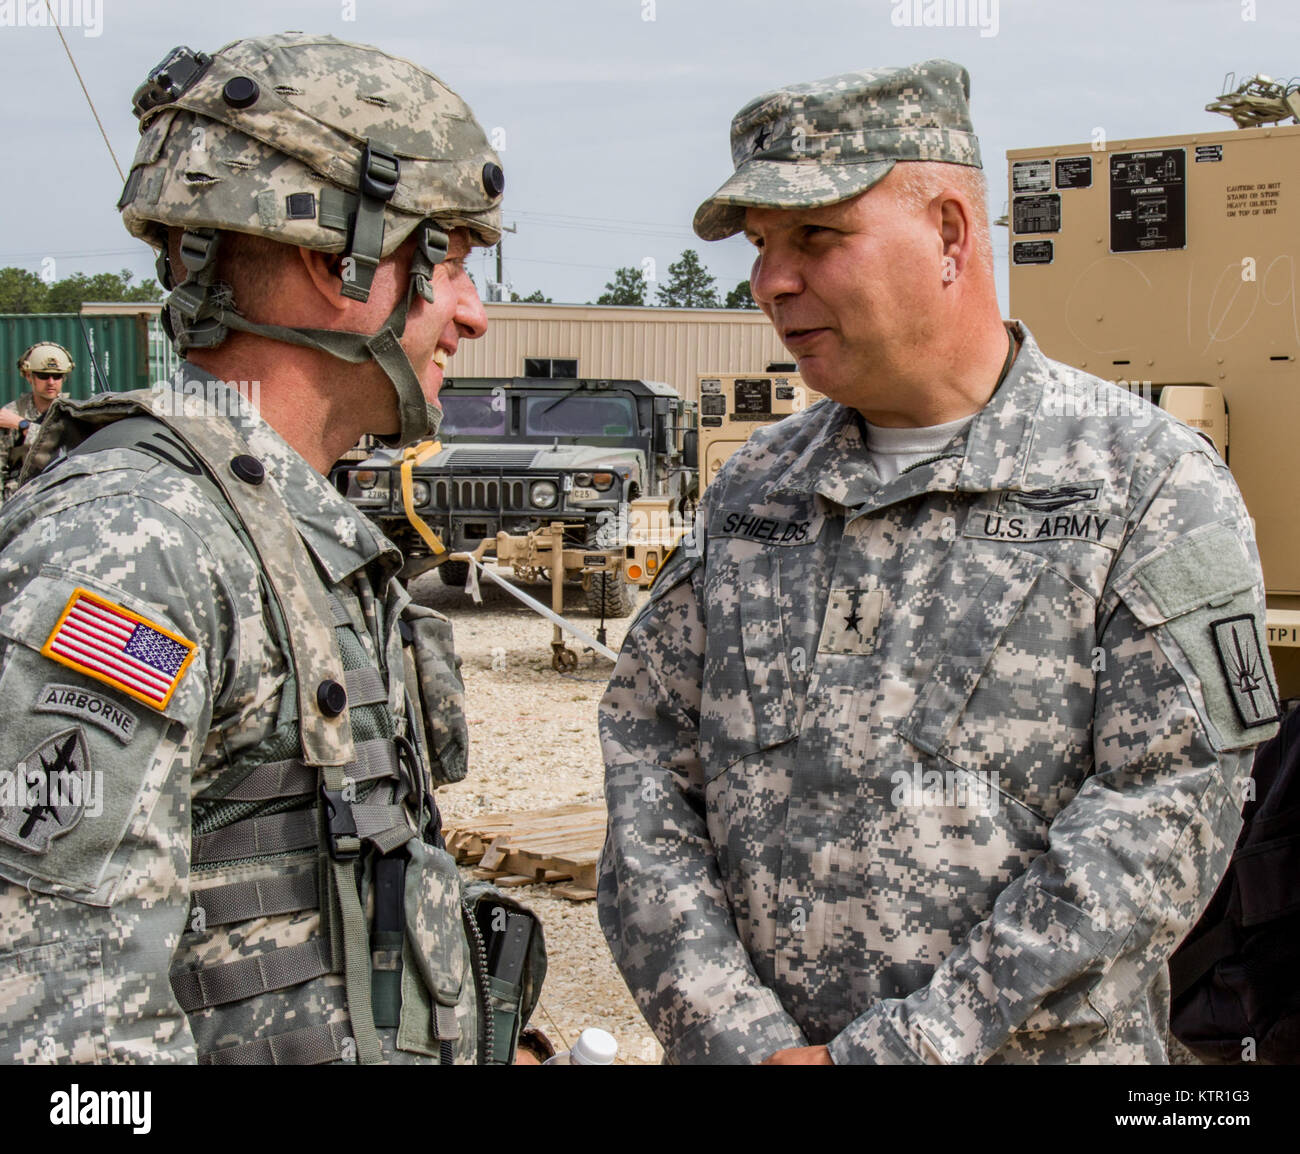 New York Army National Guard Brig. Gen. Raymond Shields, the New York National Guard’s director of joint staff, chats with a Soldier at the Army’s Joint Rotational Training Center, Ft. Polk, La., July 16, 2016.   More than 3,000 New York Army National Guard Soldiers deployed to Fort Polk, Louisiana for a three-week exercise at the Army’s Joint Readiness Training Center, July 9-30, 2016. (U.S. Army National Guard photo by Sgt. Michael Davis) Stock Photo